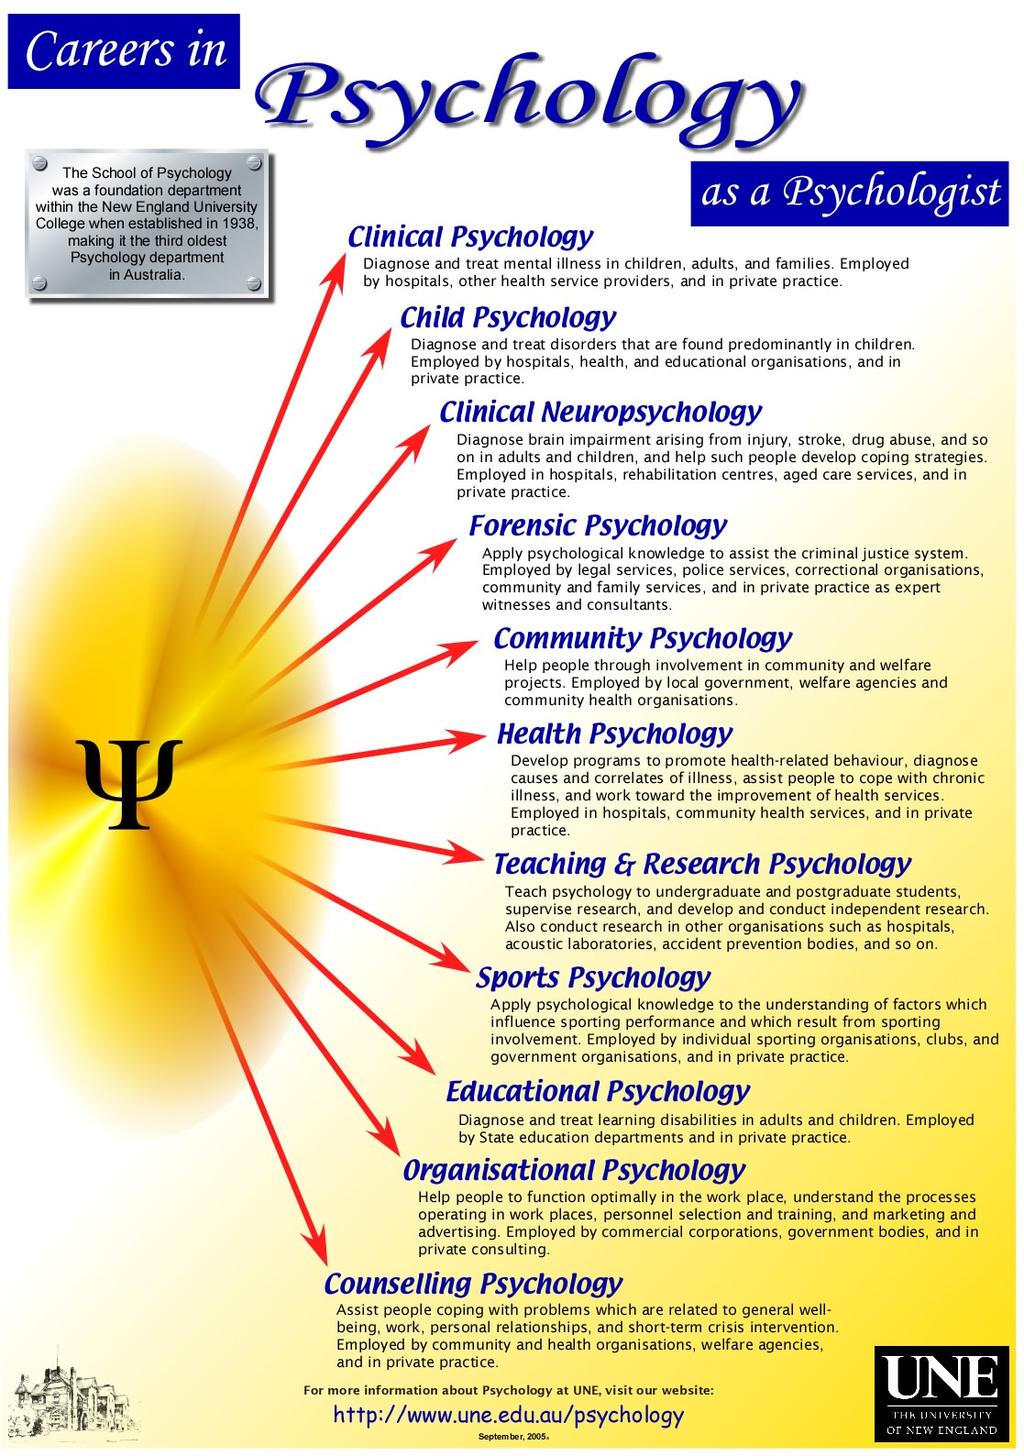 Most psychologists have an undergraduate degree in